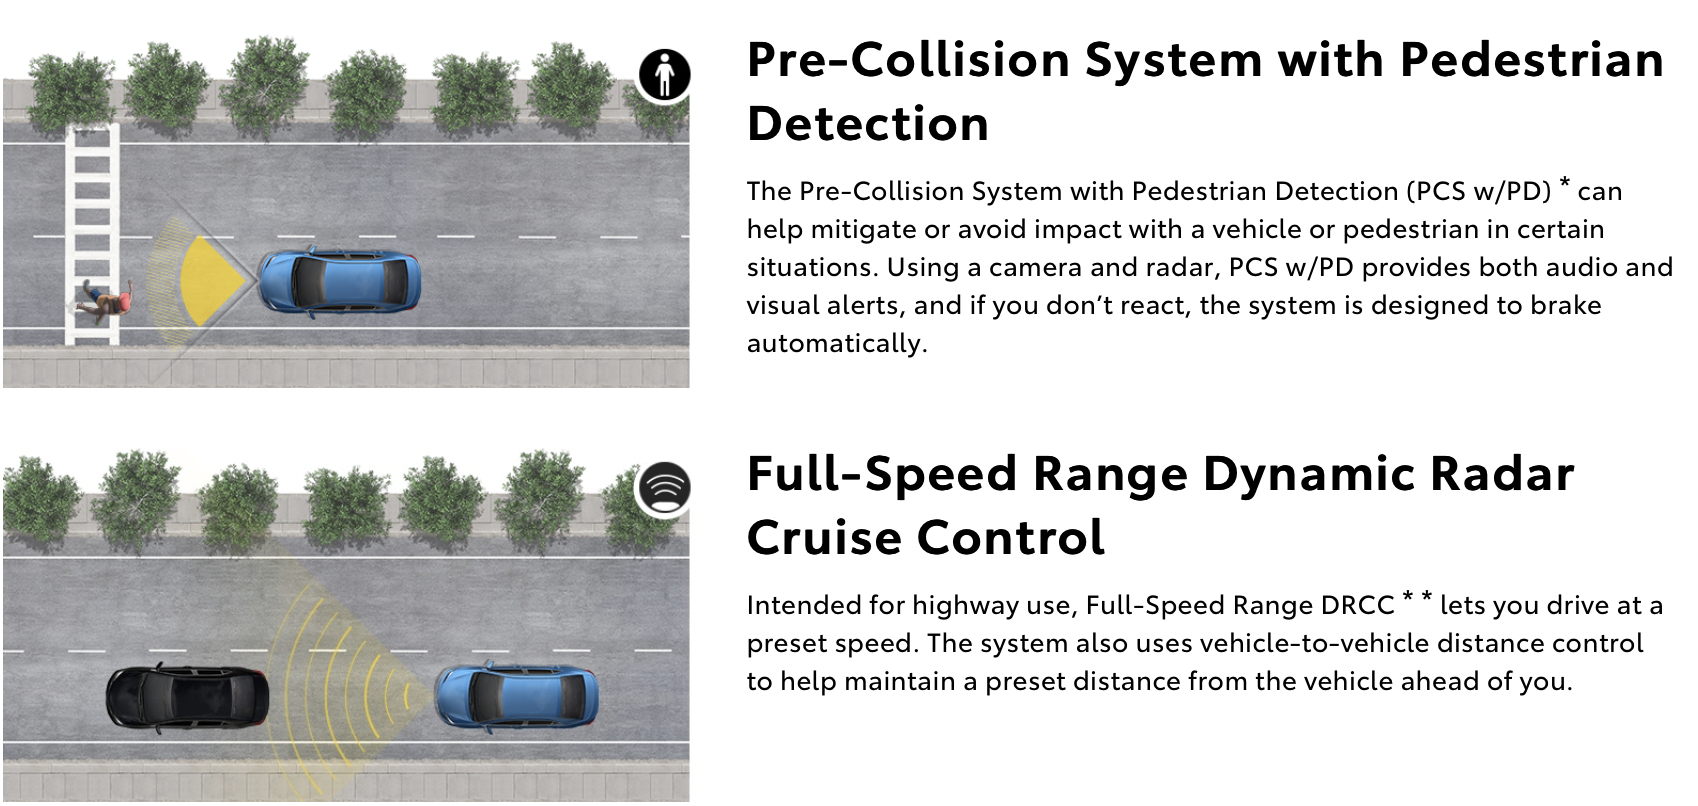 Pre-Collision System with Pedestrian Detection